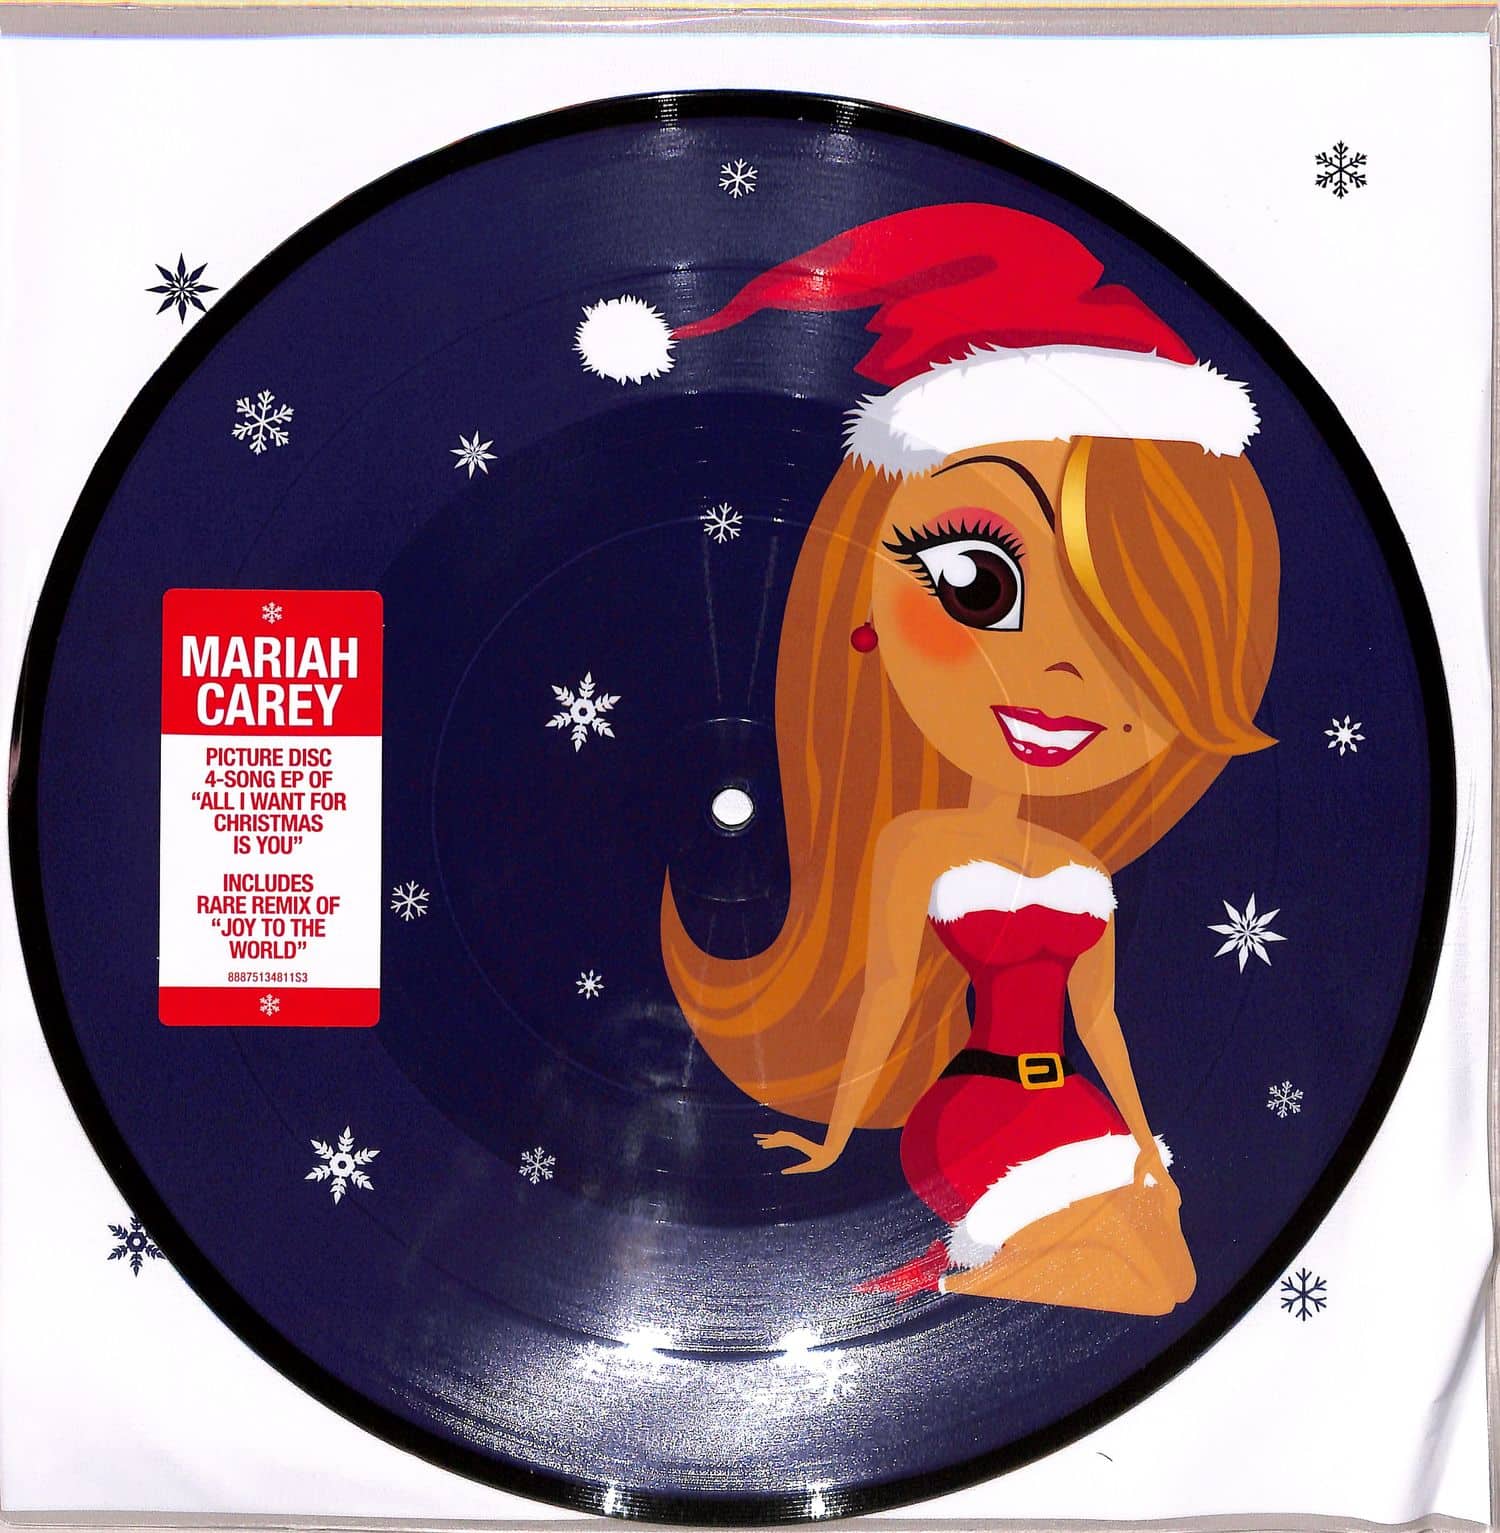 Mariah Carey - ALL I WANT FOR CHRISTMAS IS YOU 